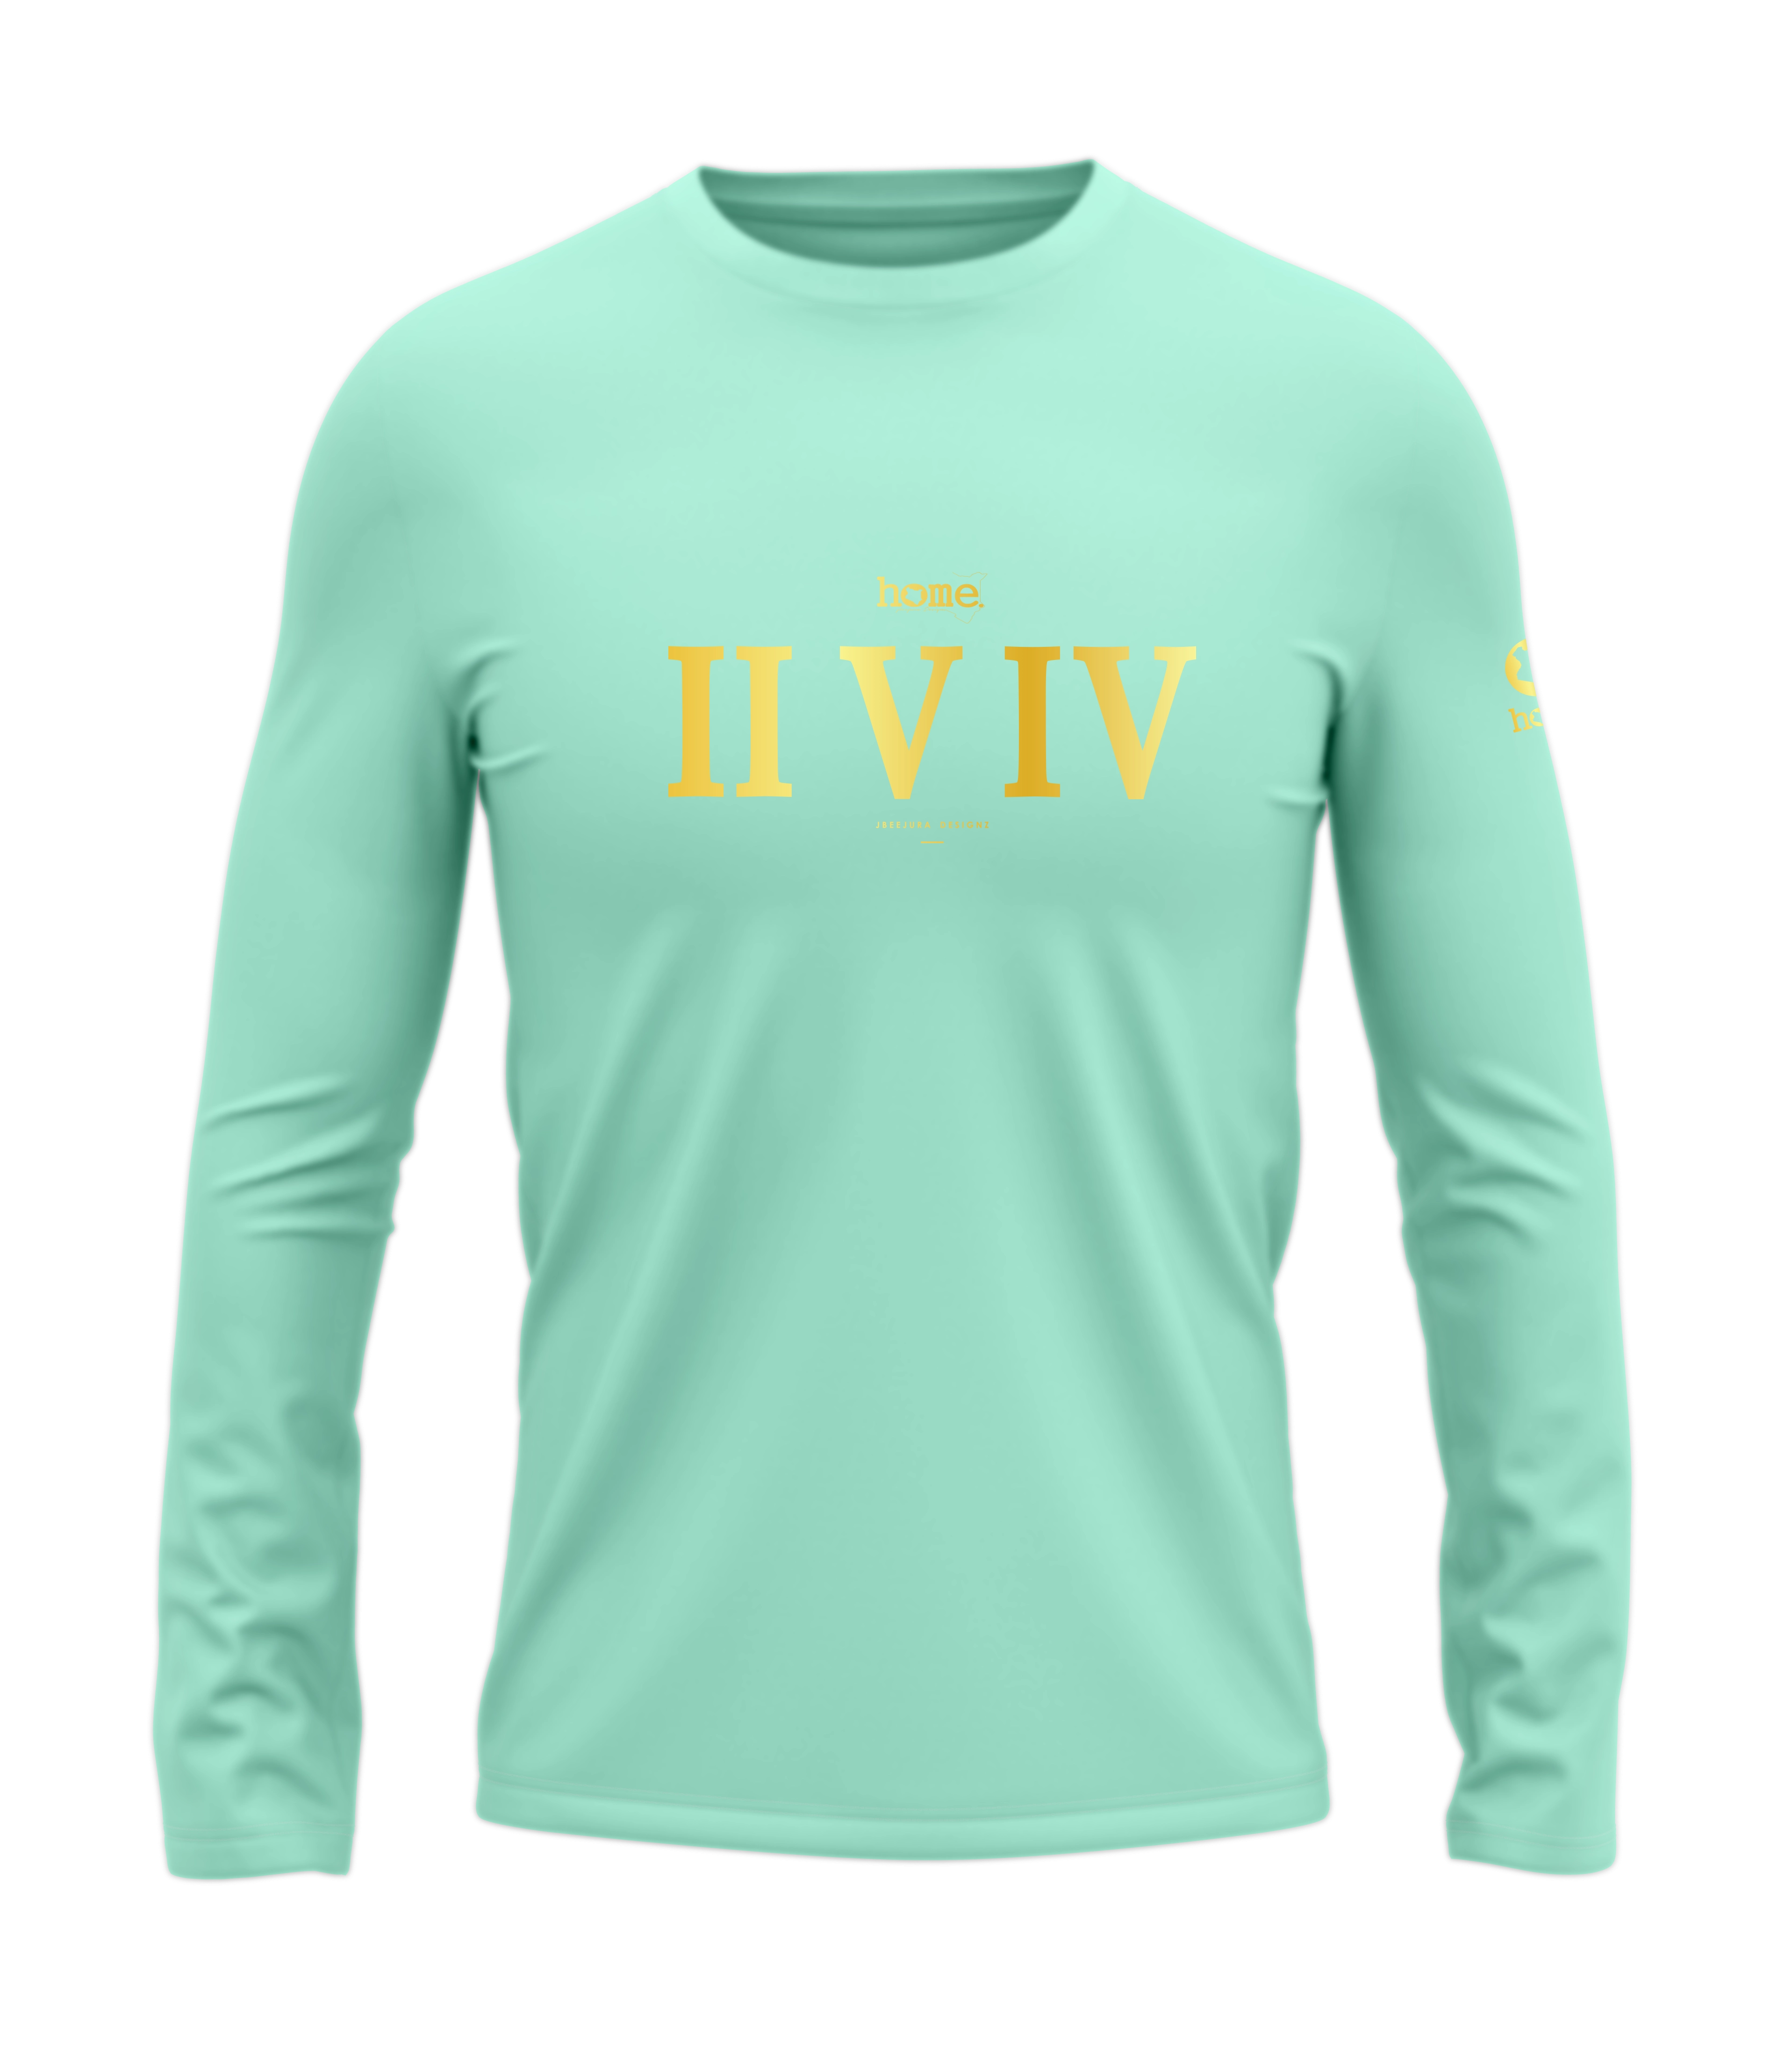 home_254 LONG-SLEEVED TURQUOISE GREEN T-SHIRT WITH A GOLD ROMAN NUMERALS PRINT – COTTON PLUS FABRIC